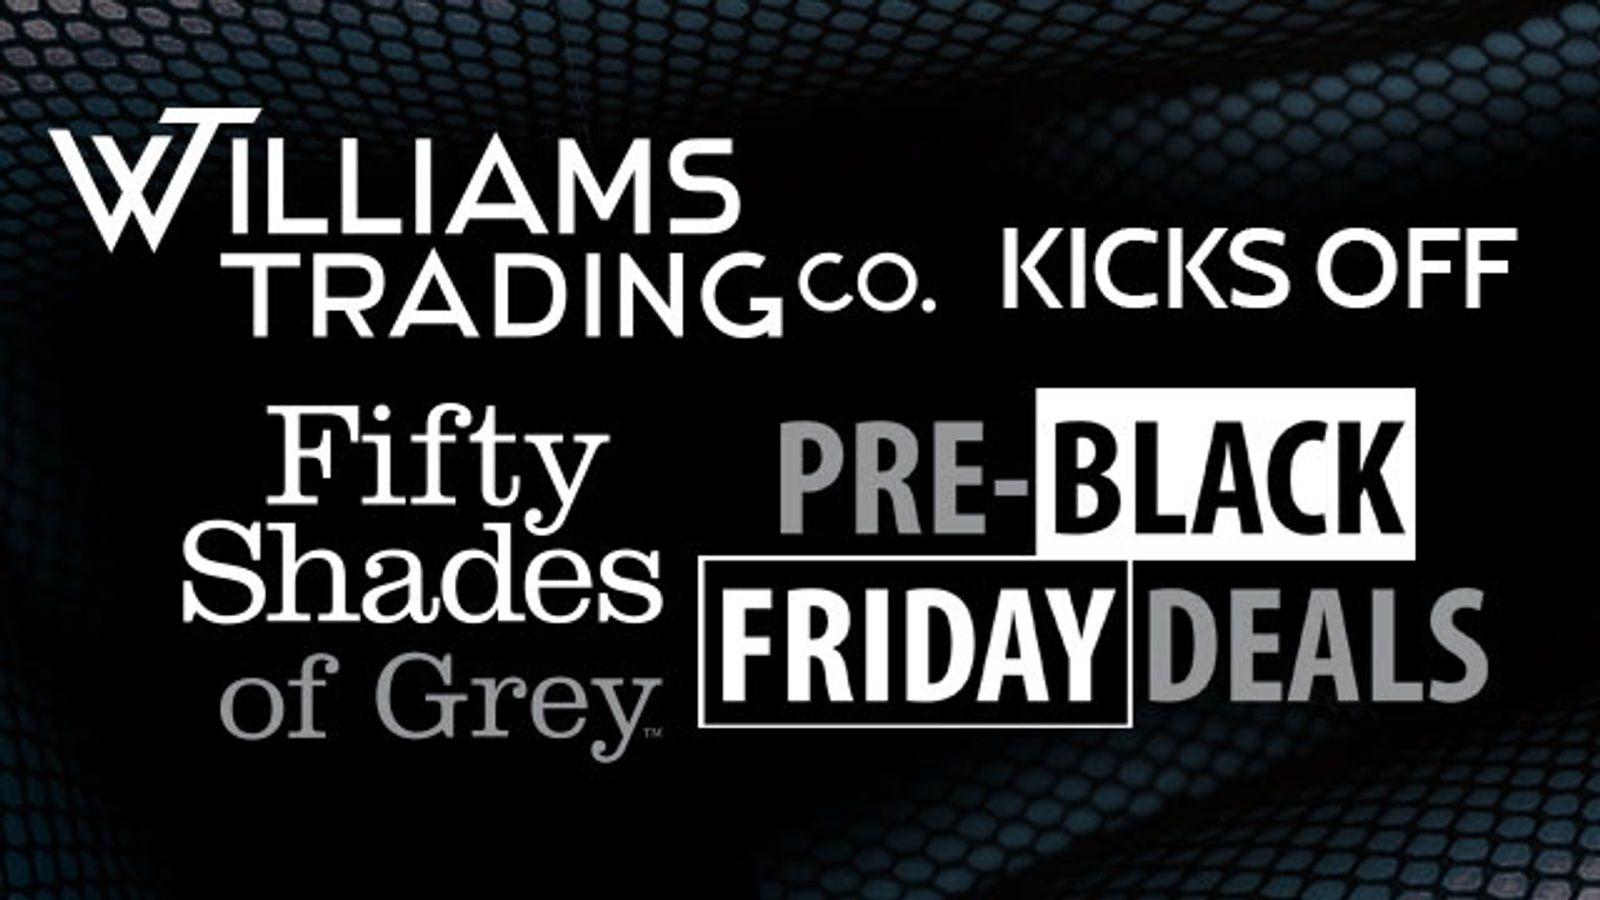 Williams Trading Kicks Off A Fifty Shades of Grey Pre-Black Friday Special